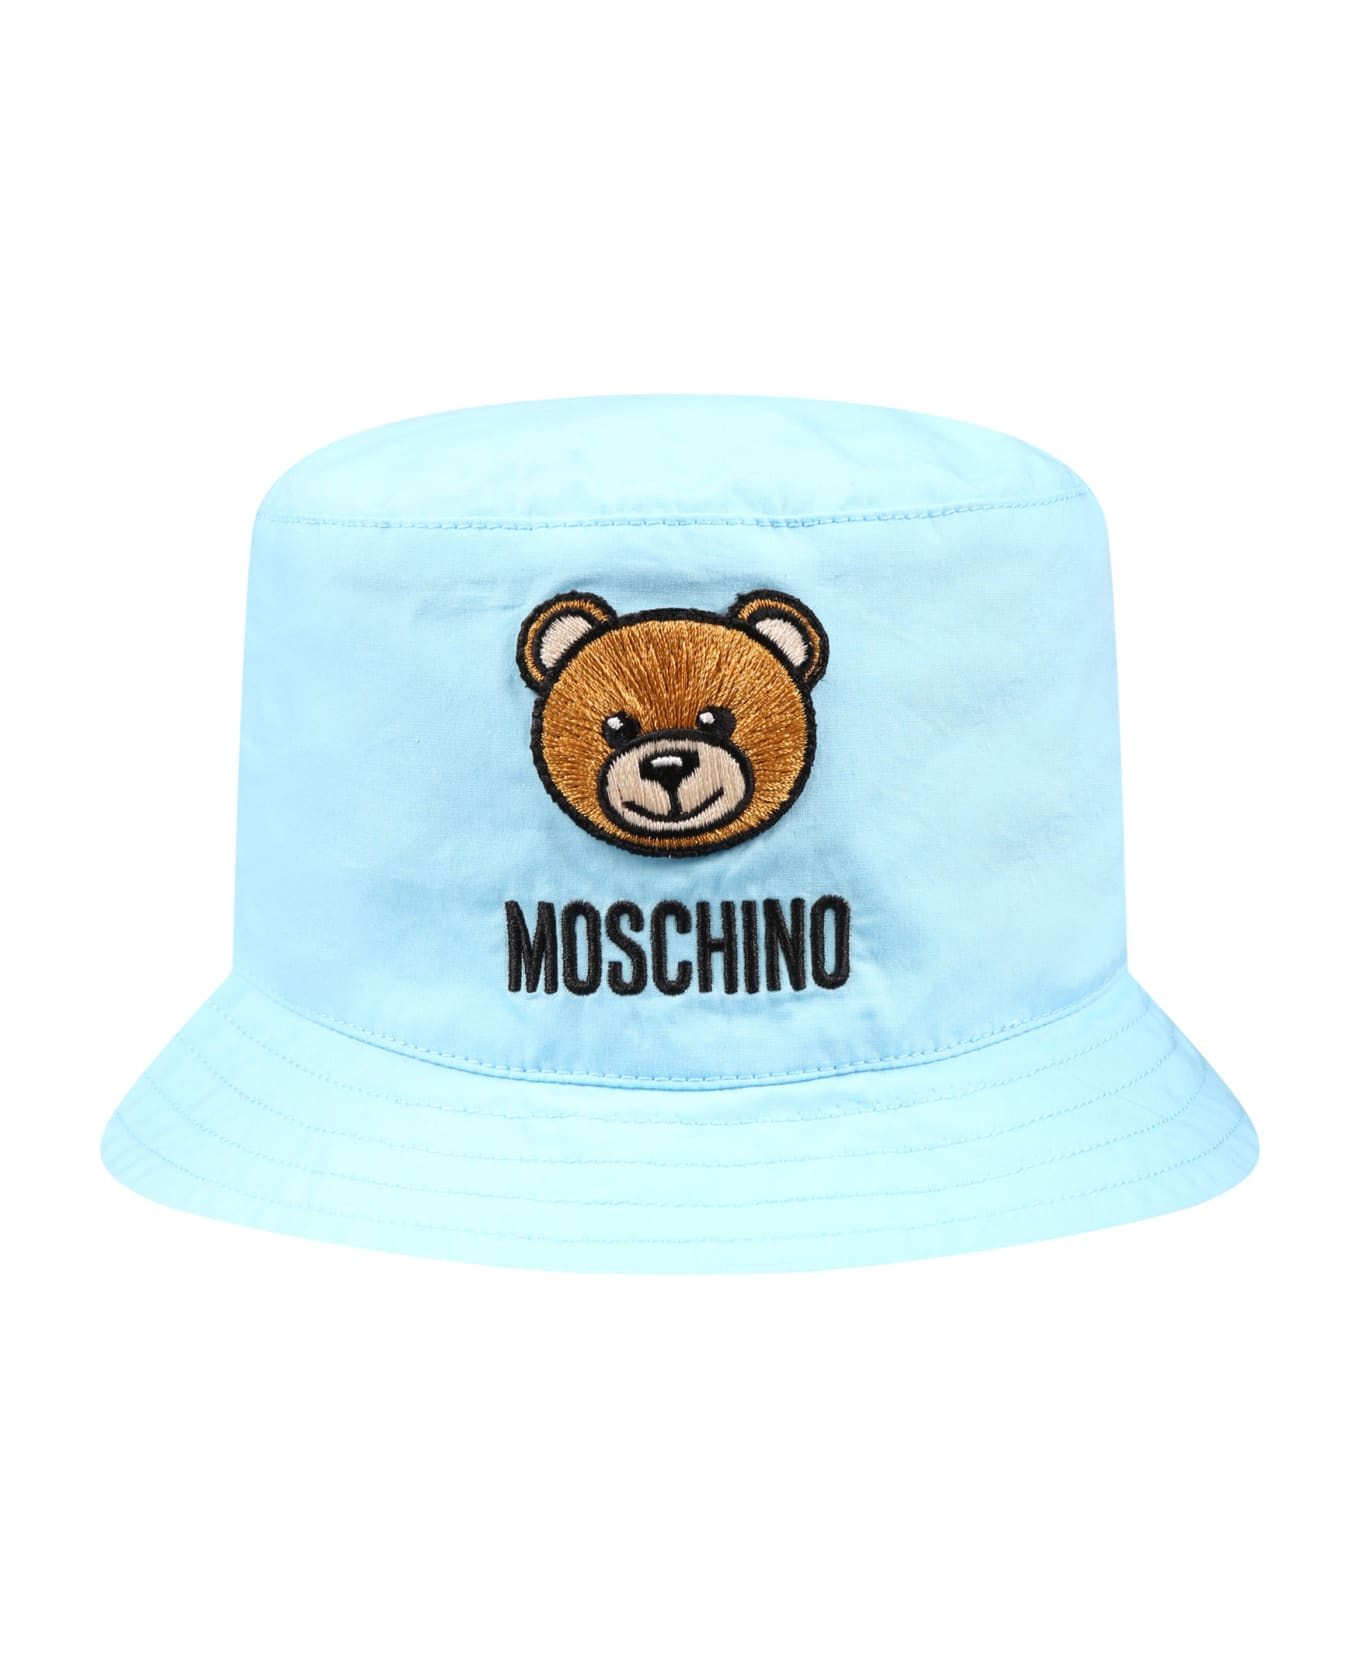 Moschino Sky Blue Cloche For Baby Boy With Teddy Bear - Light Blue アクセサリー＆ギフト